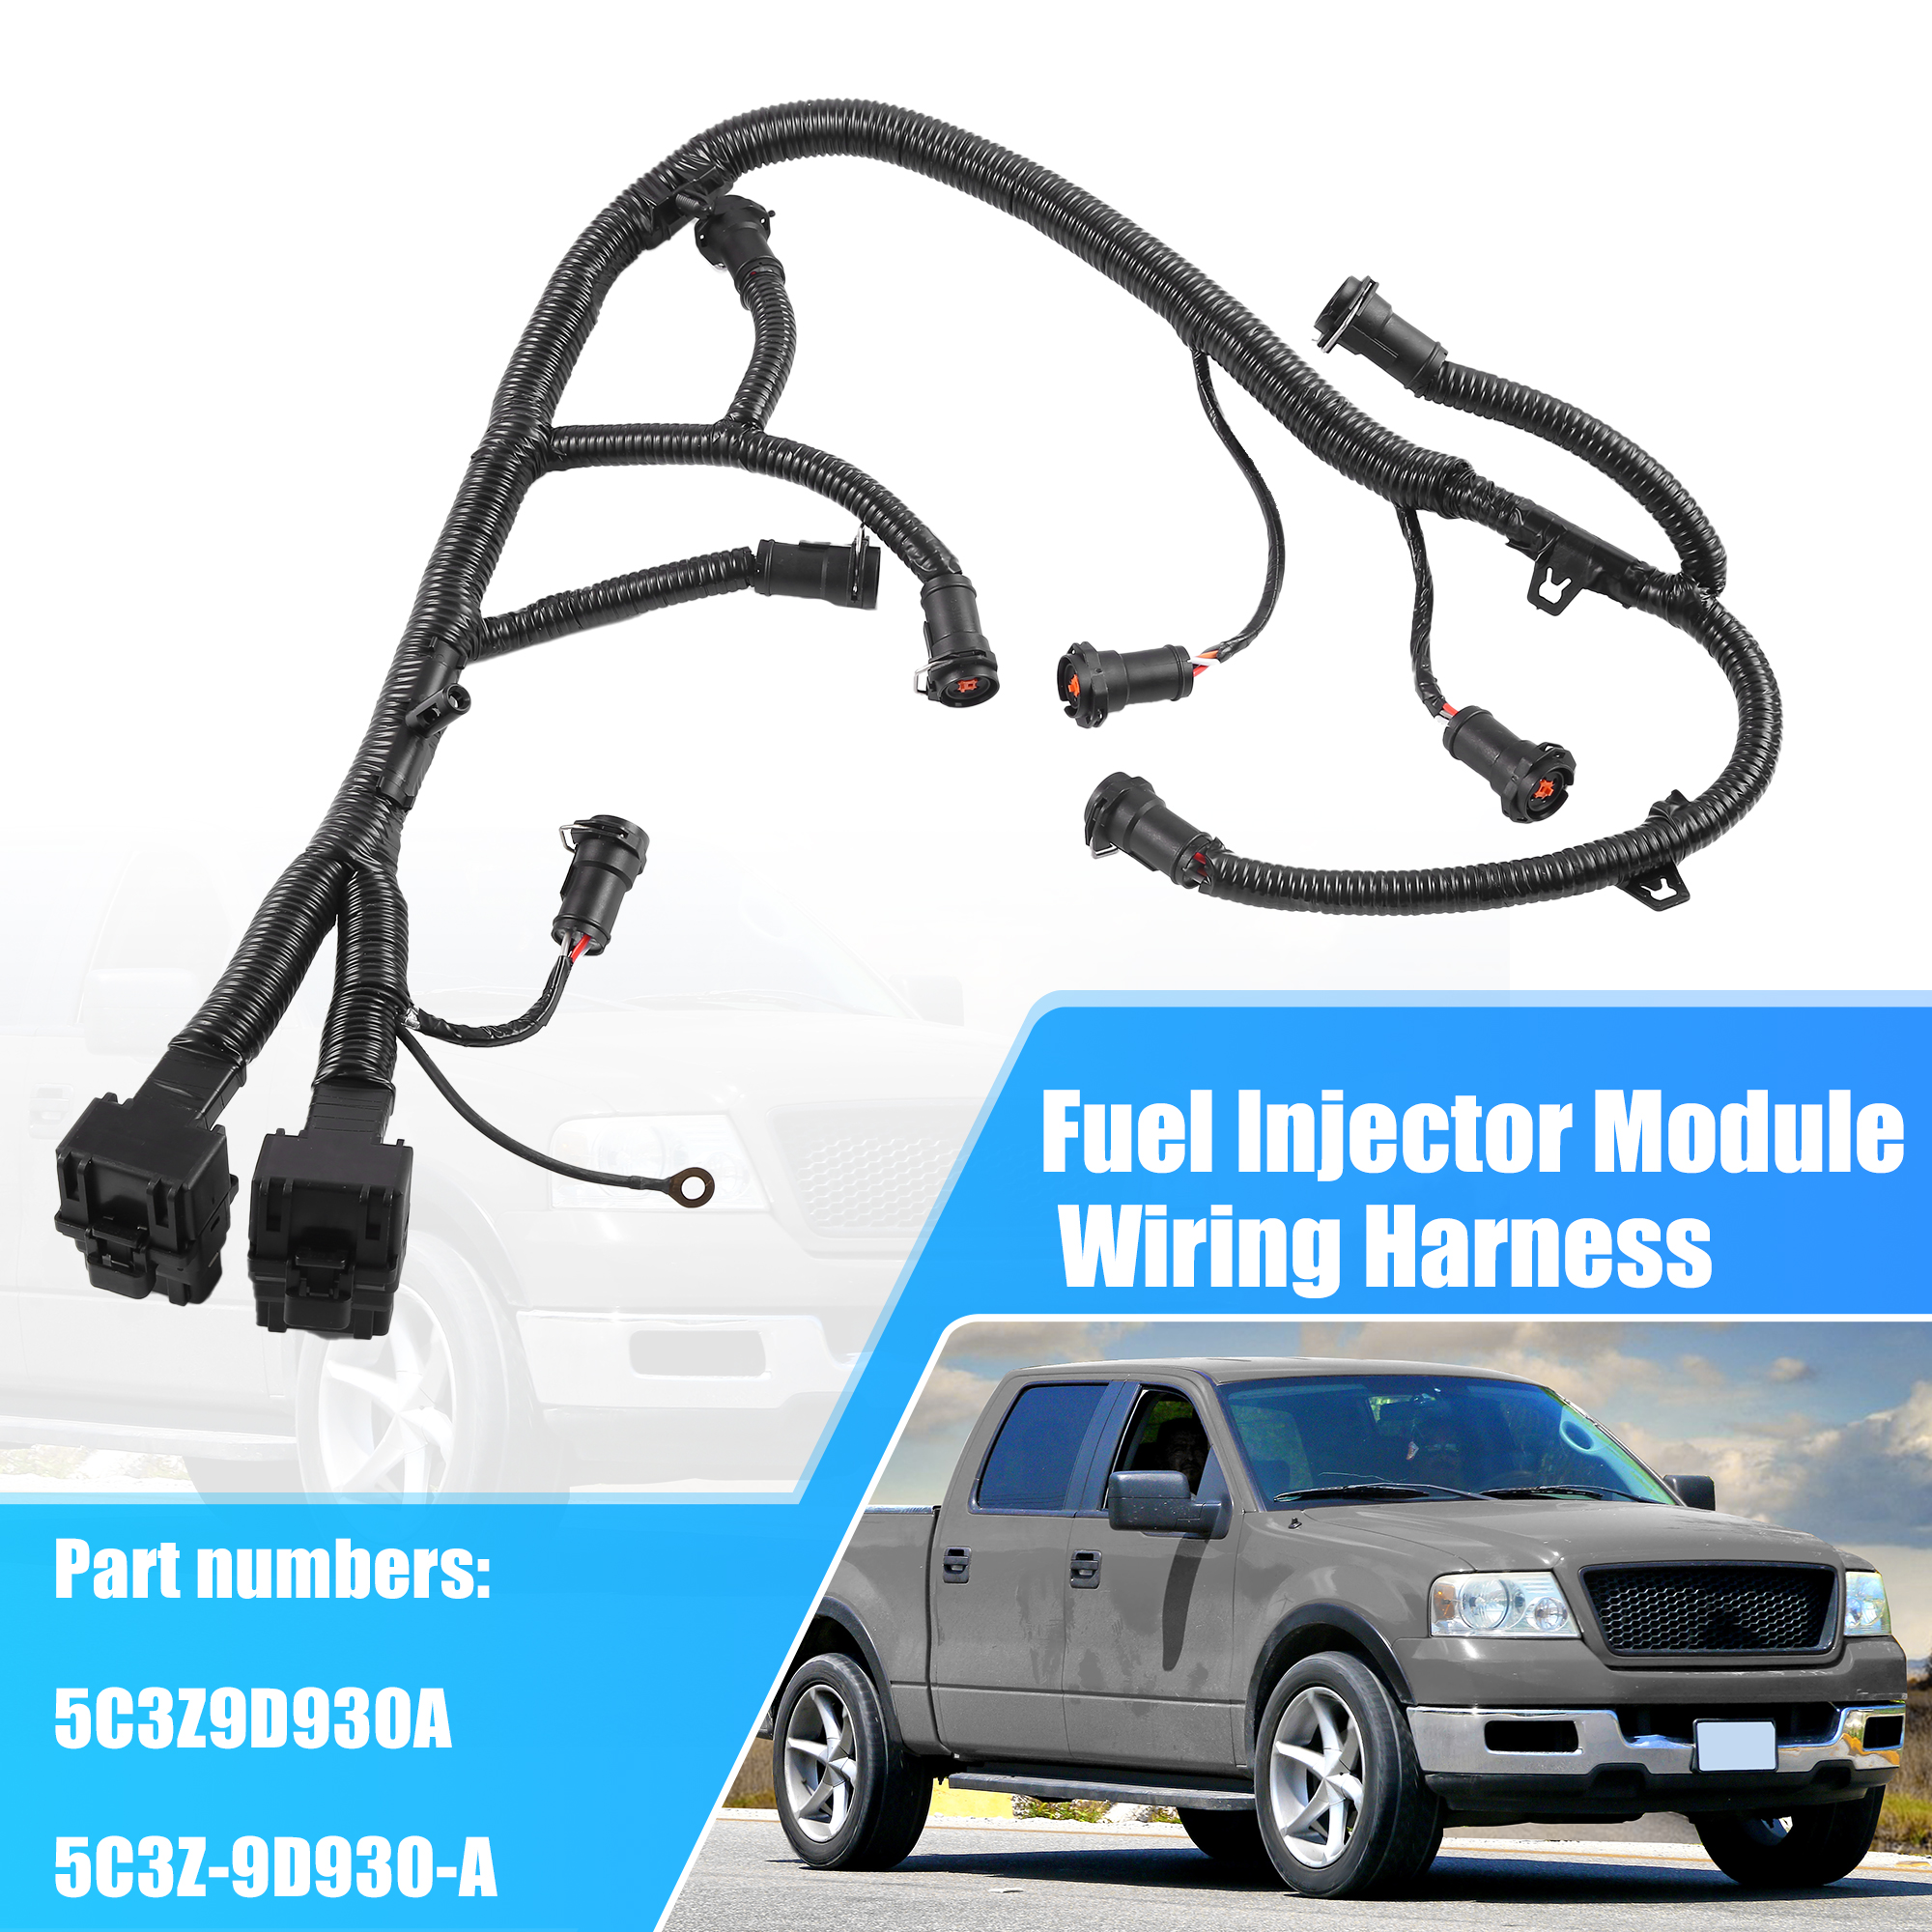 Unique Bargains FICM Fuel Injector Wiring Harness for Ford F250 F350 F450  F550 Excursion V8 6.0 Diesel Engine 5C3Z9D930A